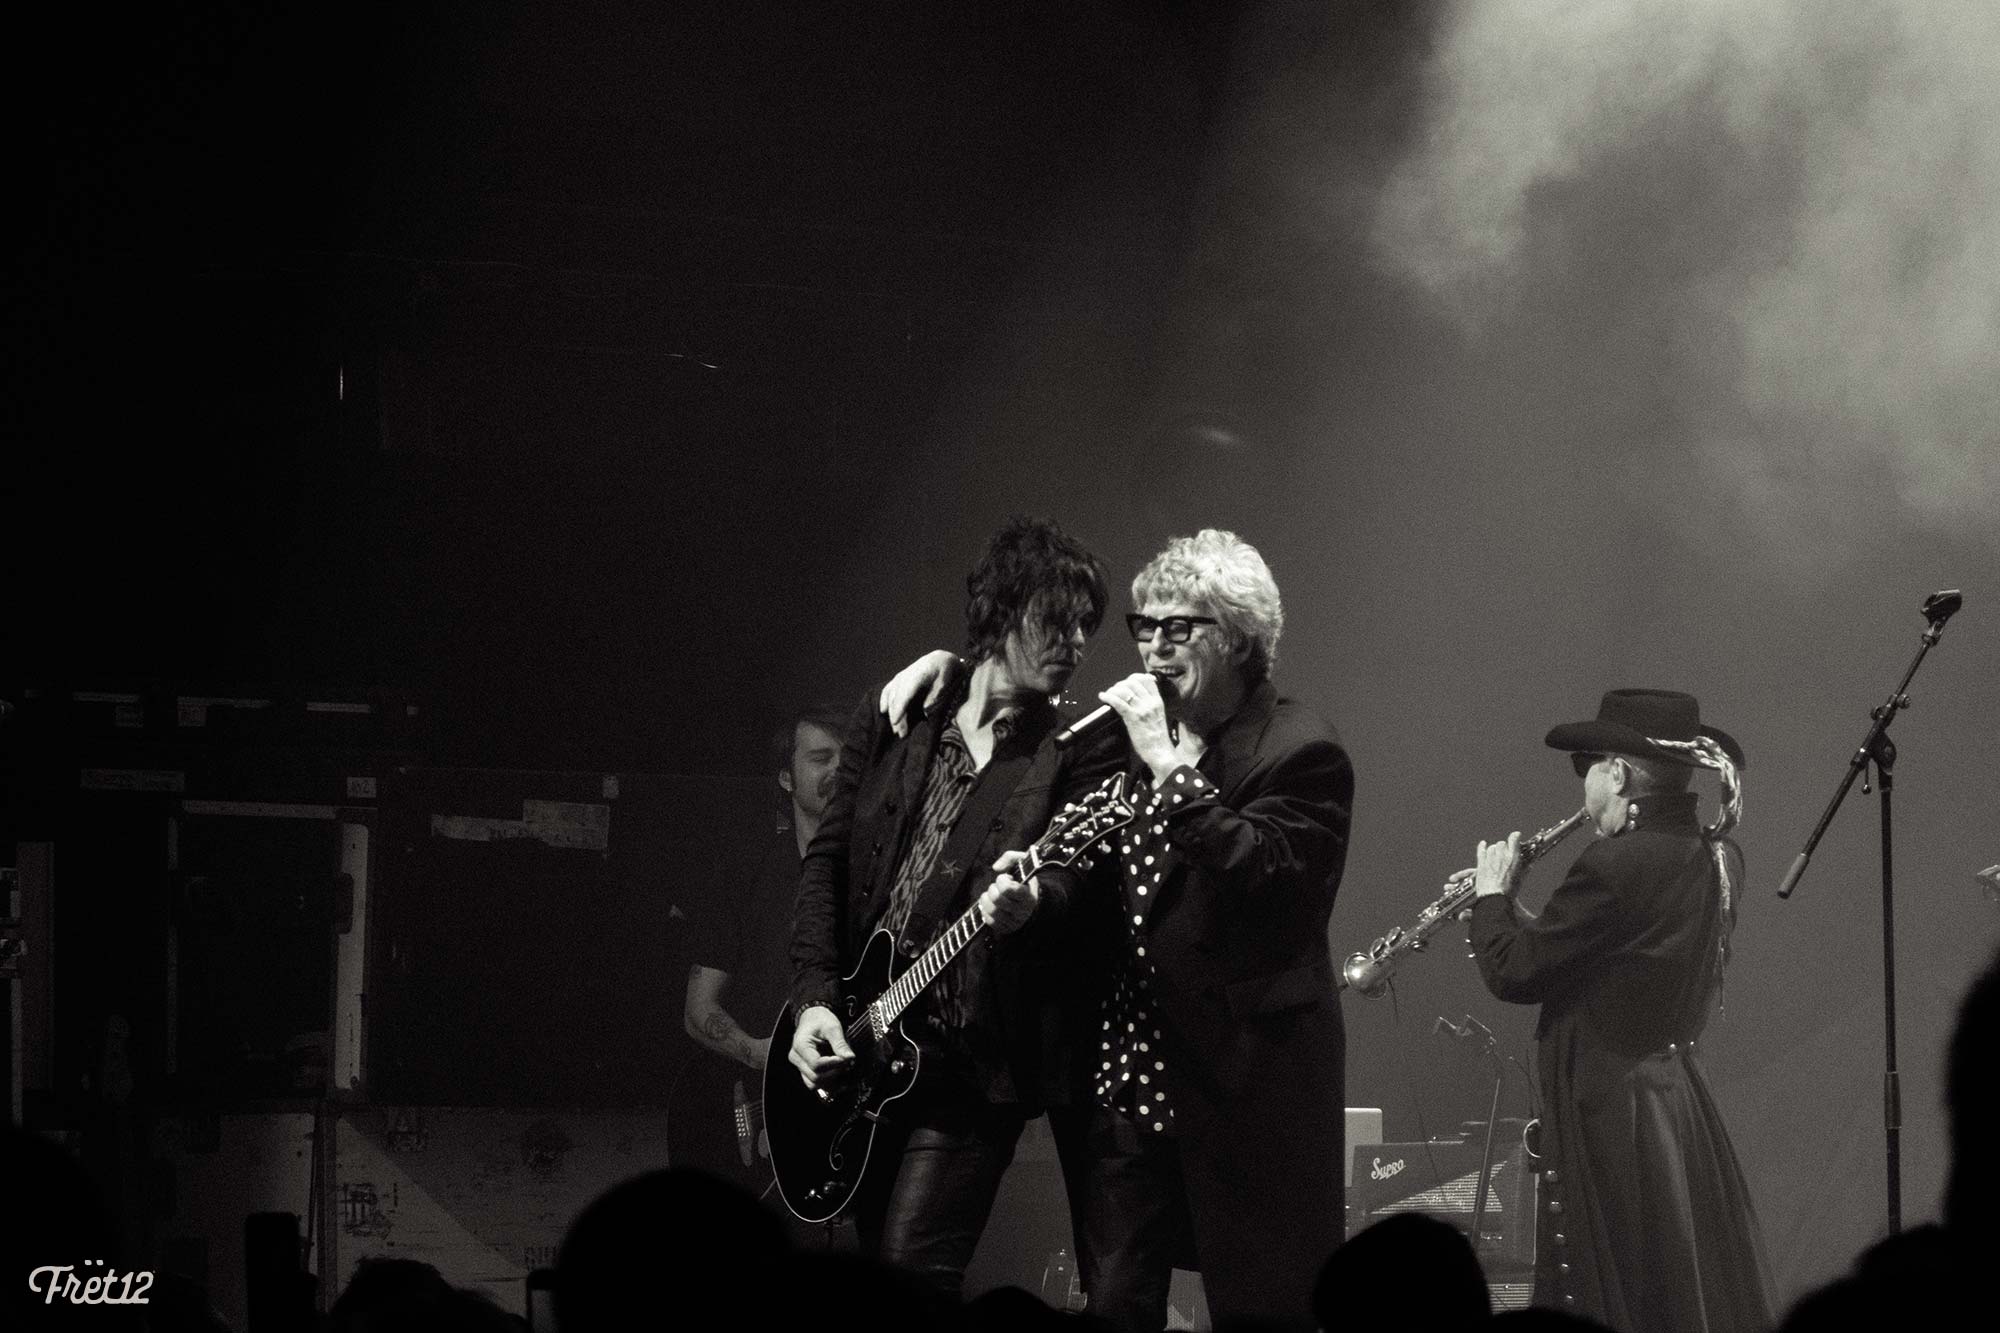 The Psychedelic Furs at the Salt Shed - Photos by FRET12